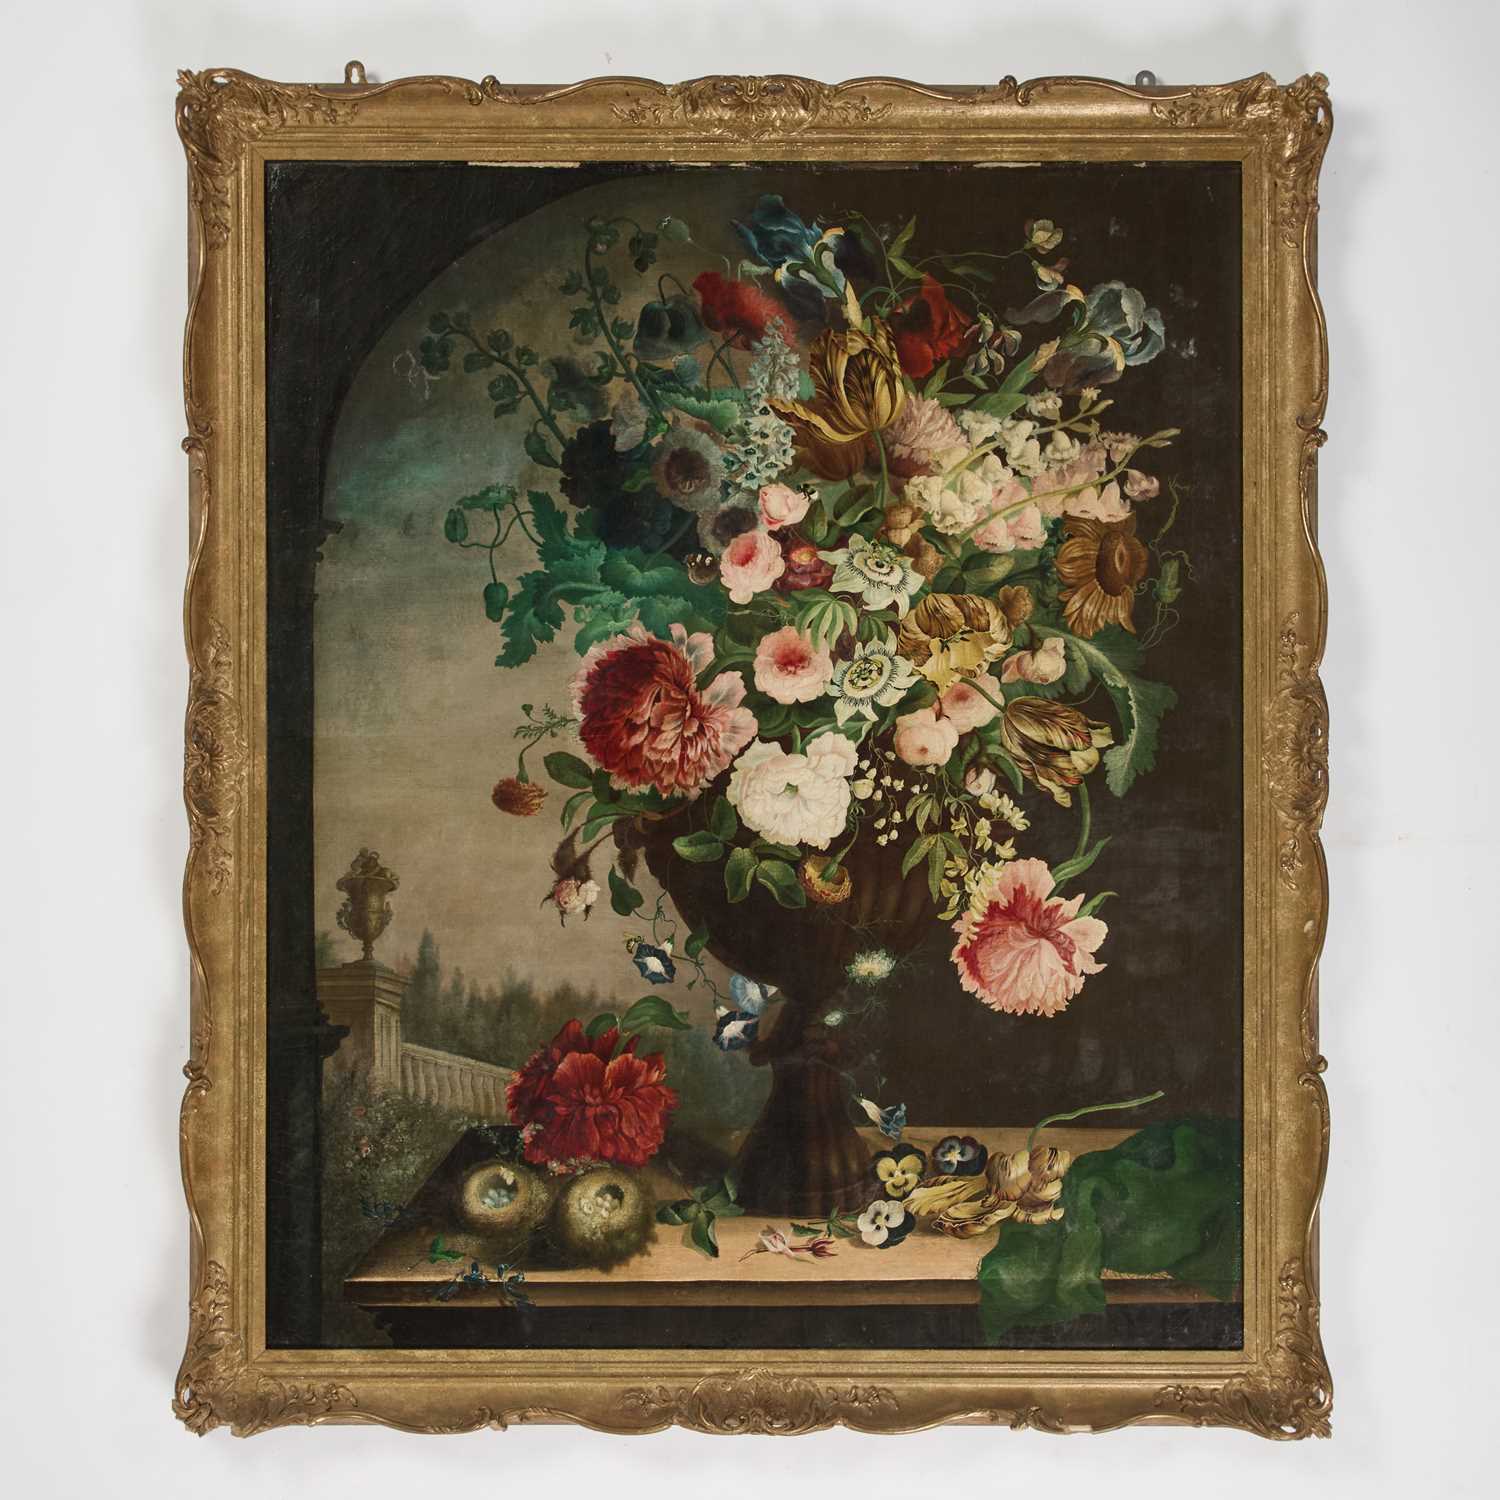 19TH CENTURY FRENCH SCHOOL STILL LIFE OF FLOWERS IN AN URN IN CLASSICAL LANDSCAPE - Image 2 of 3